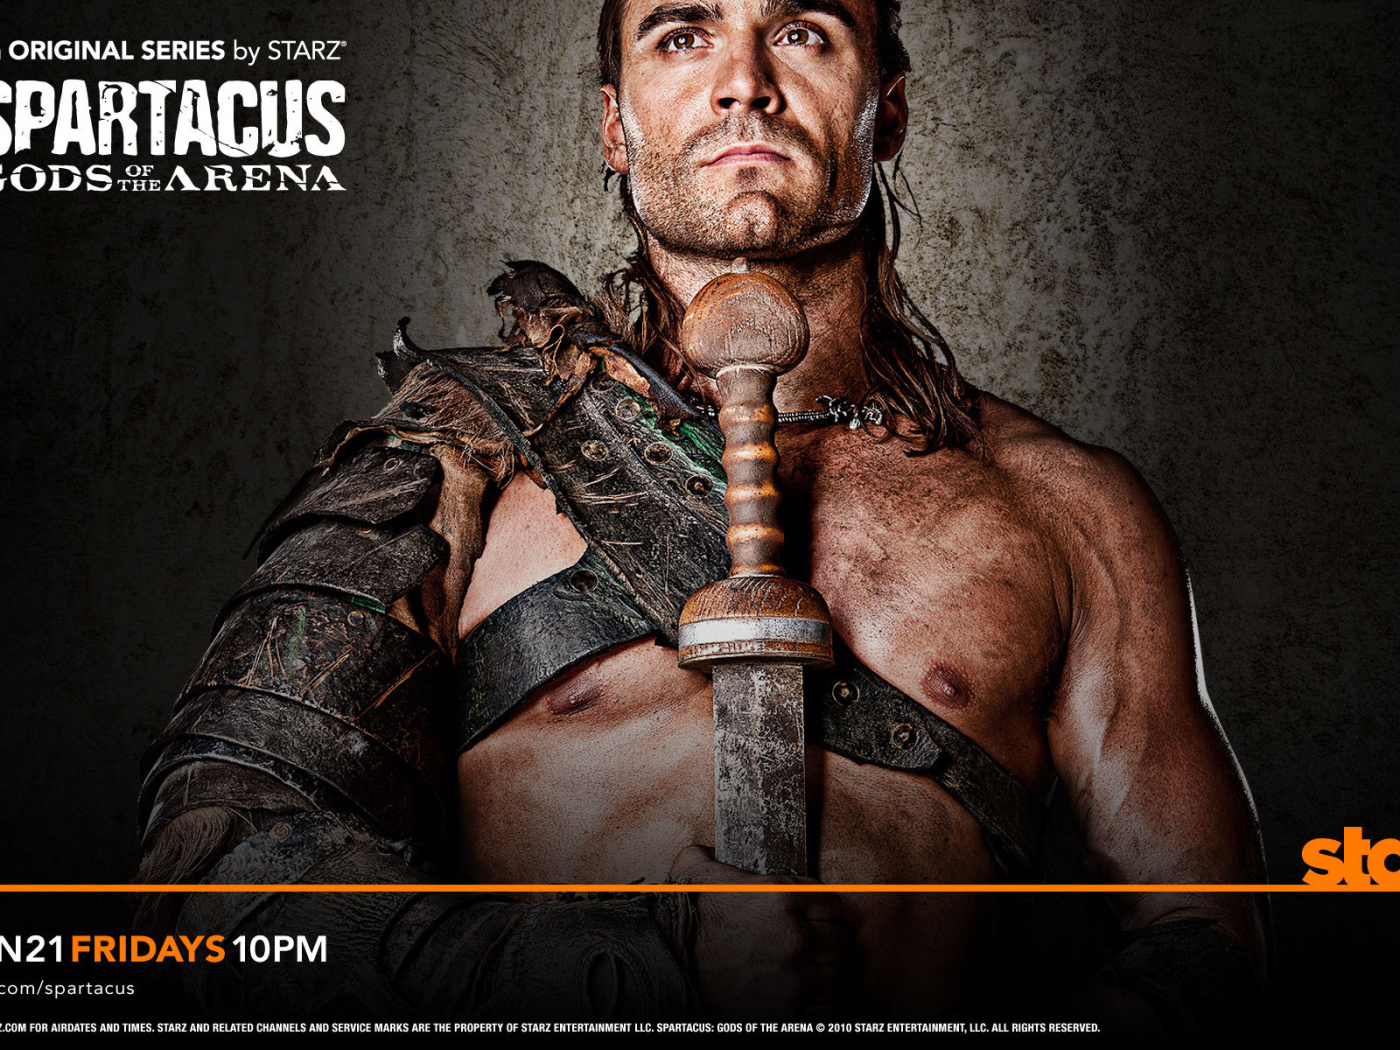 Dustin Claire in the role of Spartacus